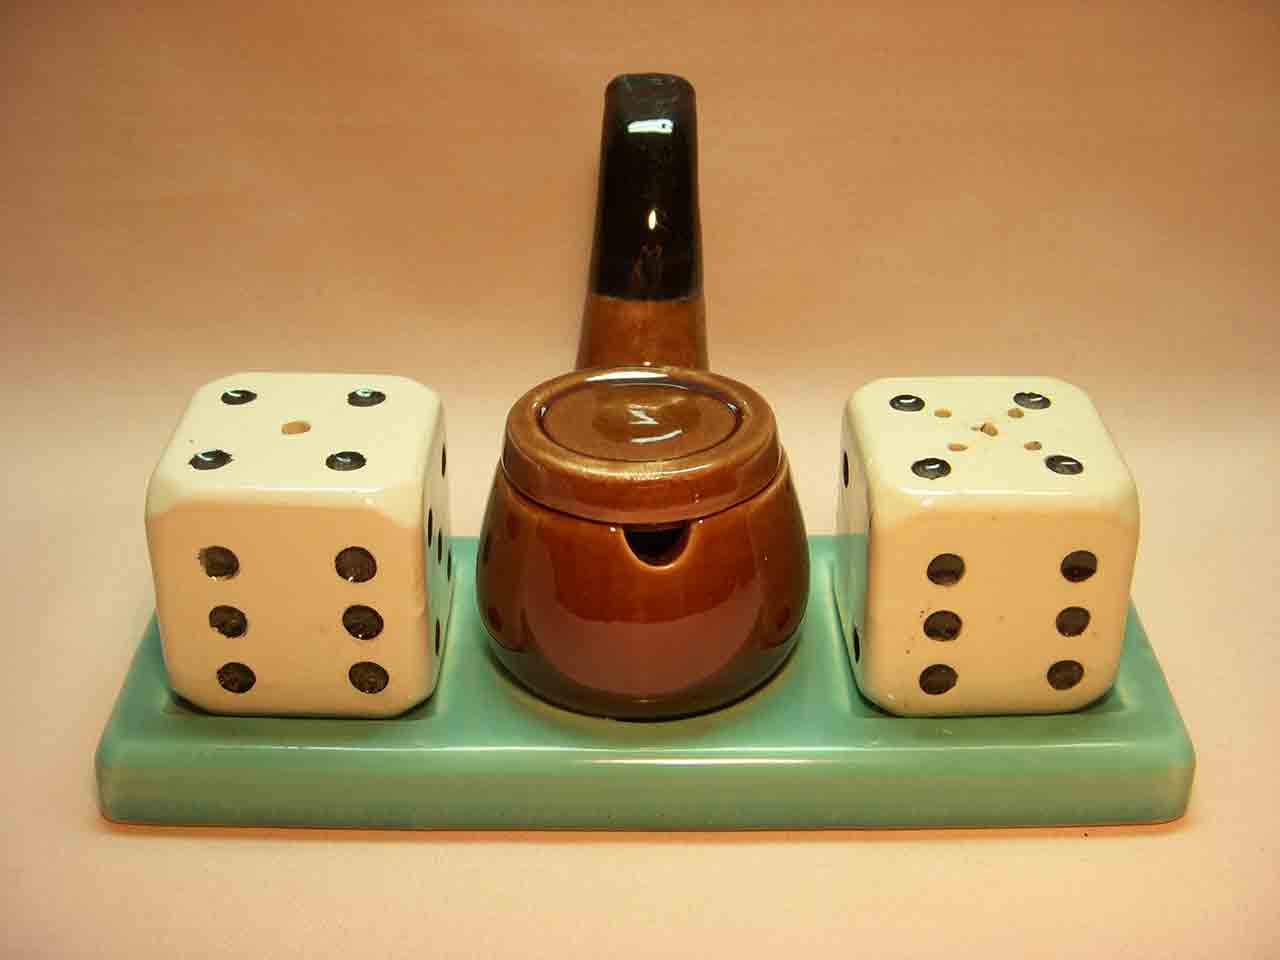 Pipe and dice condiment set salt and pepper shaker